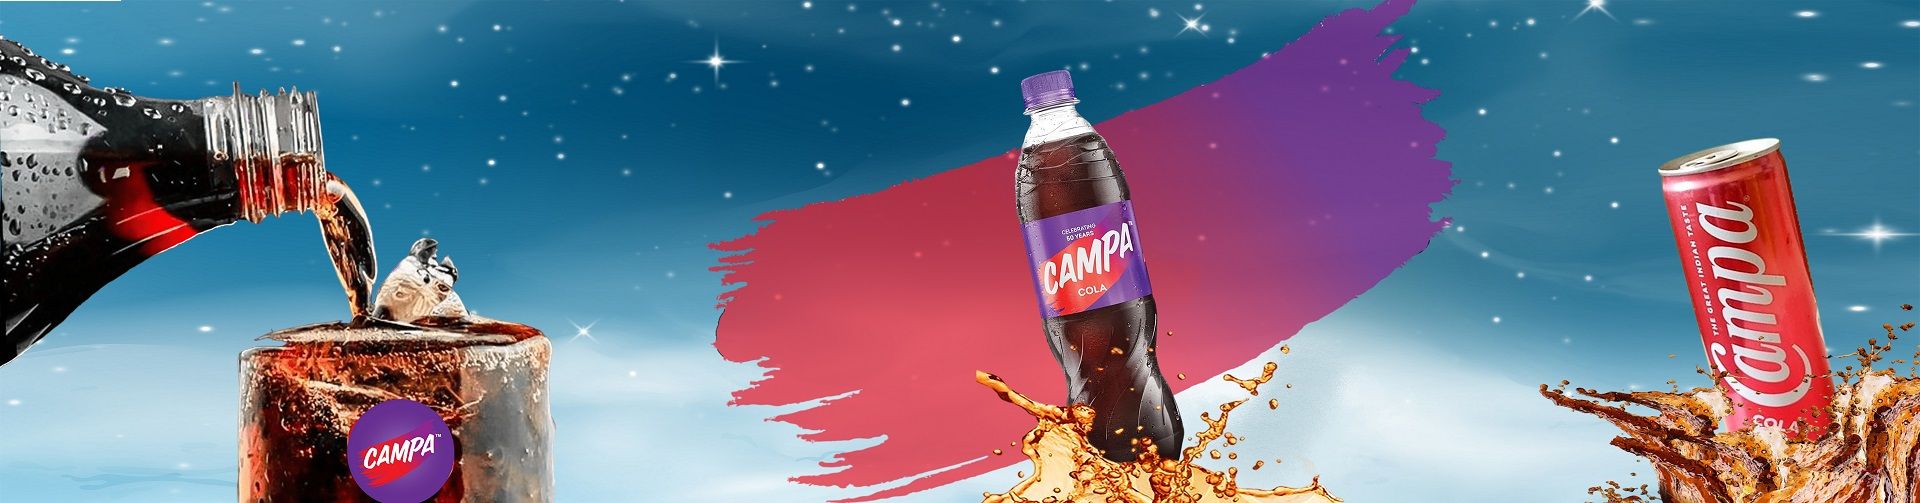 Enjoy Campa Cola drinks at an outdoor event, surrounded by green trees and blue skies.